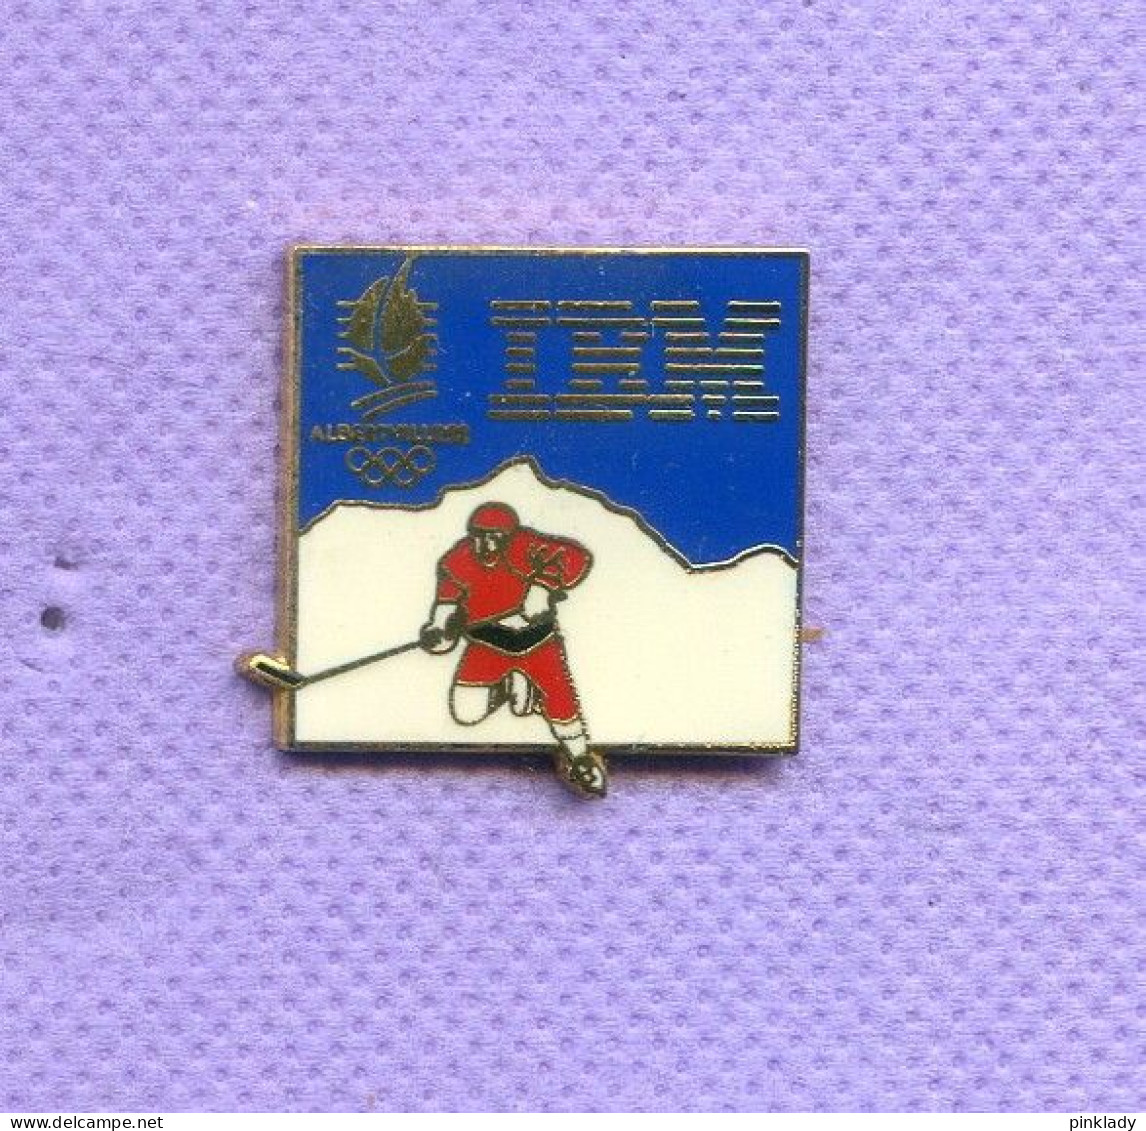 Rare Pins Jeux Olympiques Albertville 1992 Hockey Ibm Ab126 - Olympic Games